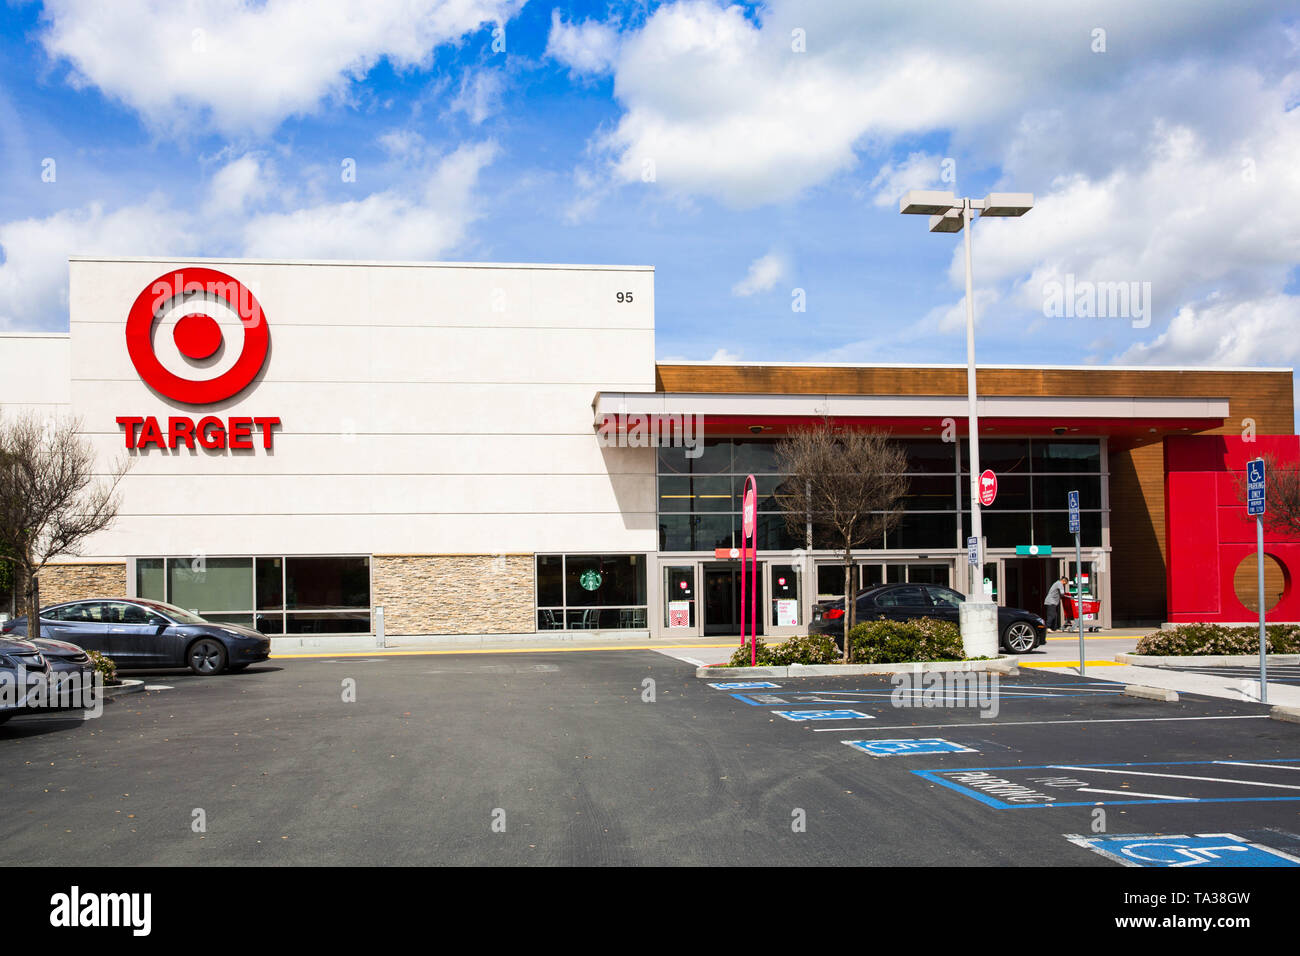 San Jose, CA/ USA - March 26, 2019: Target store building. Target Corporation is the eighth-largest retailer in the United States, and is a component Stock Photo